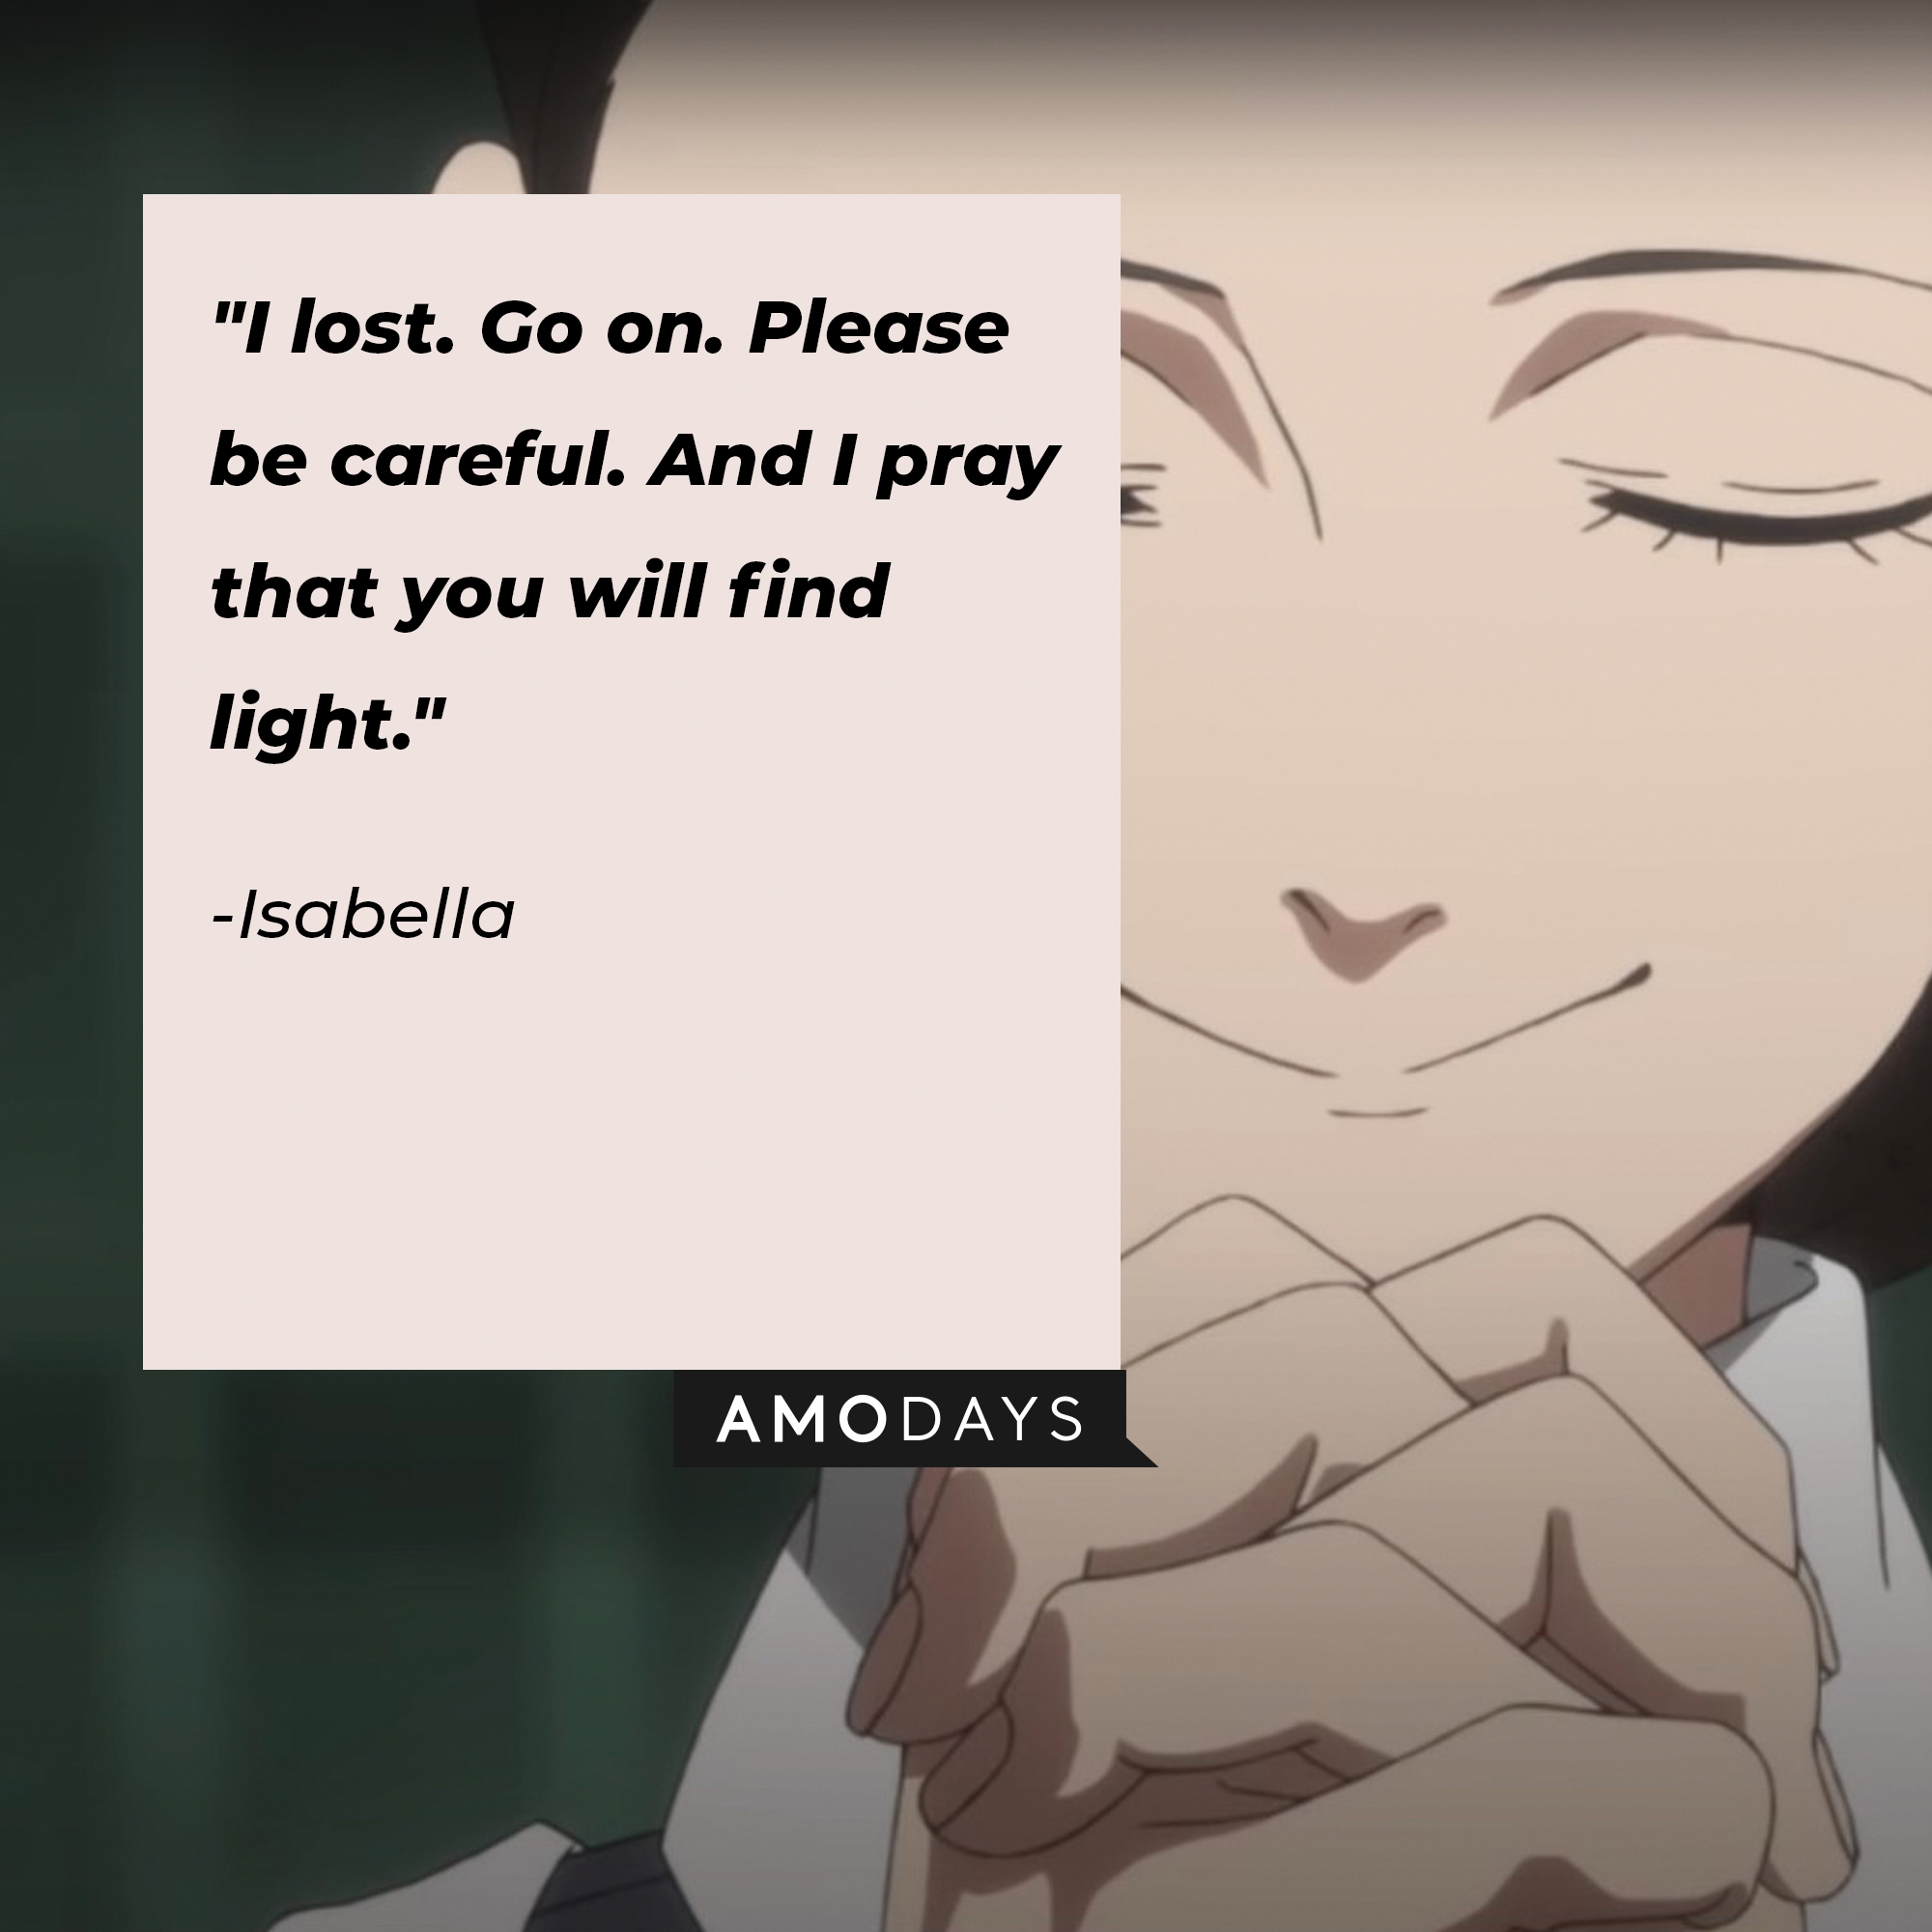 Isabella's quote: "I lost. Go on. Please be careful. And I pray that you will find light." | Image: AmoDays